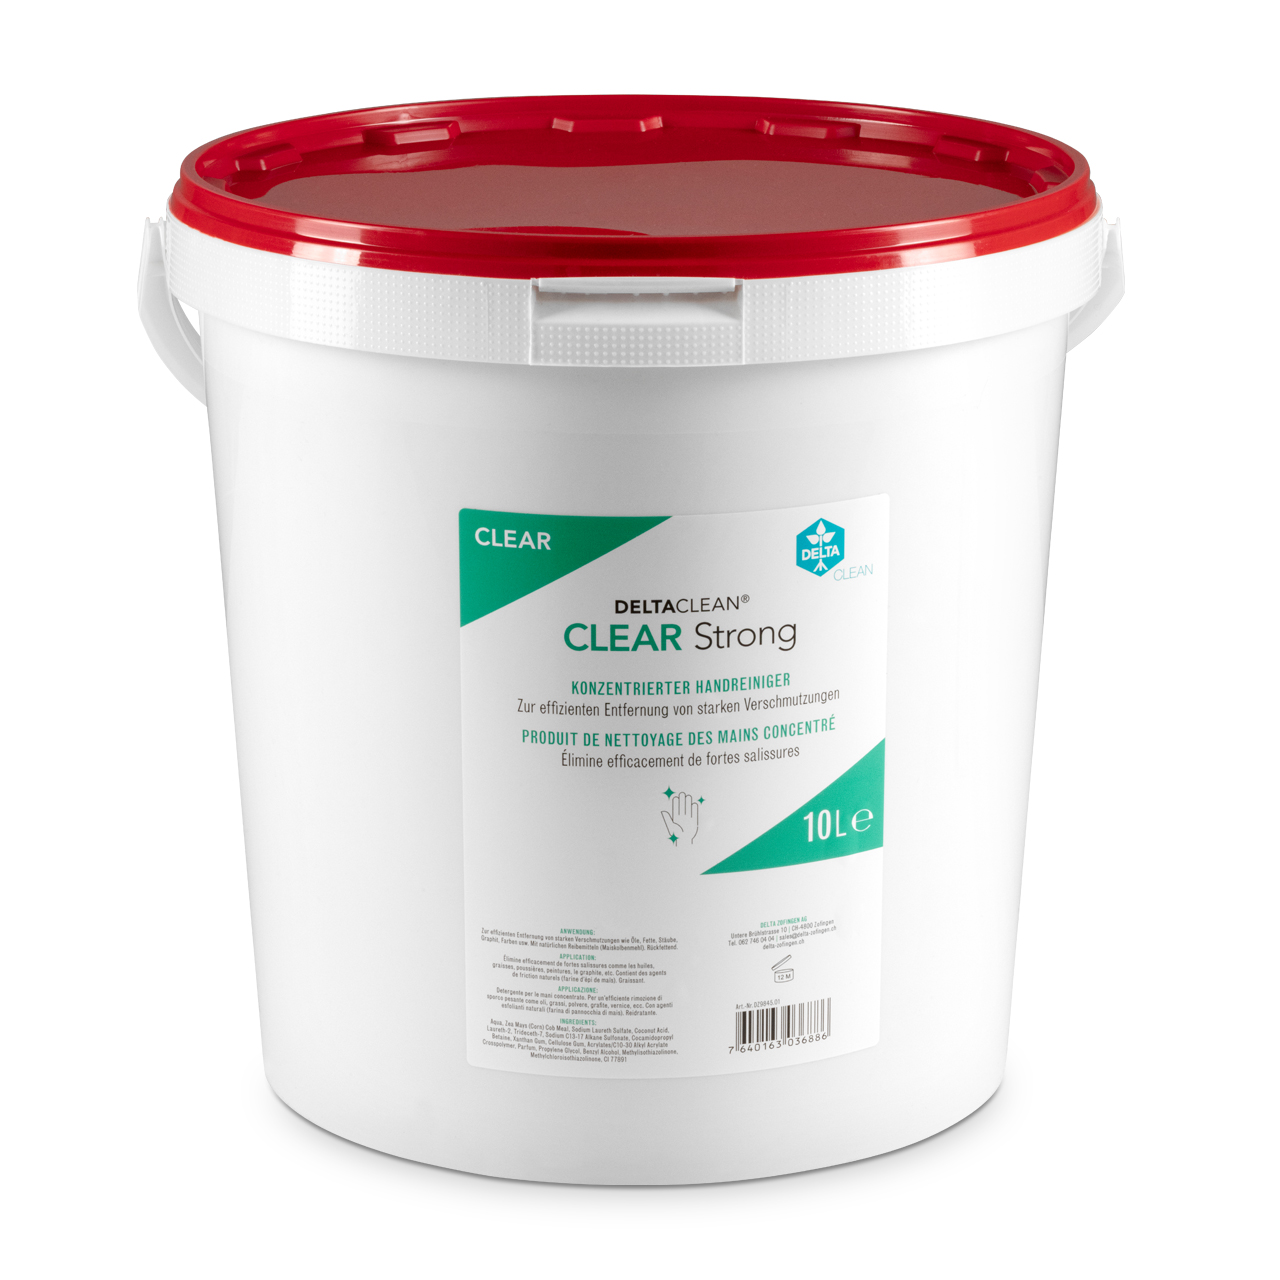 DELTACLEAN® Clear Strong 10 l